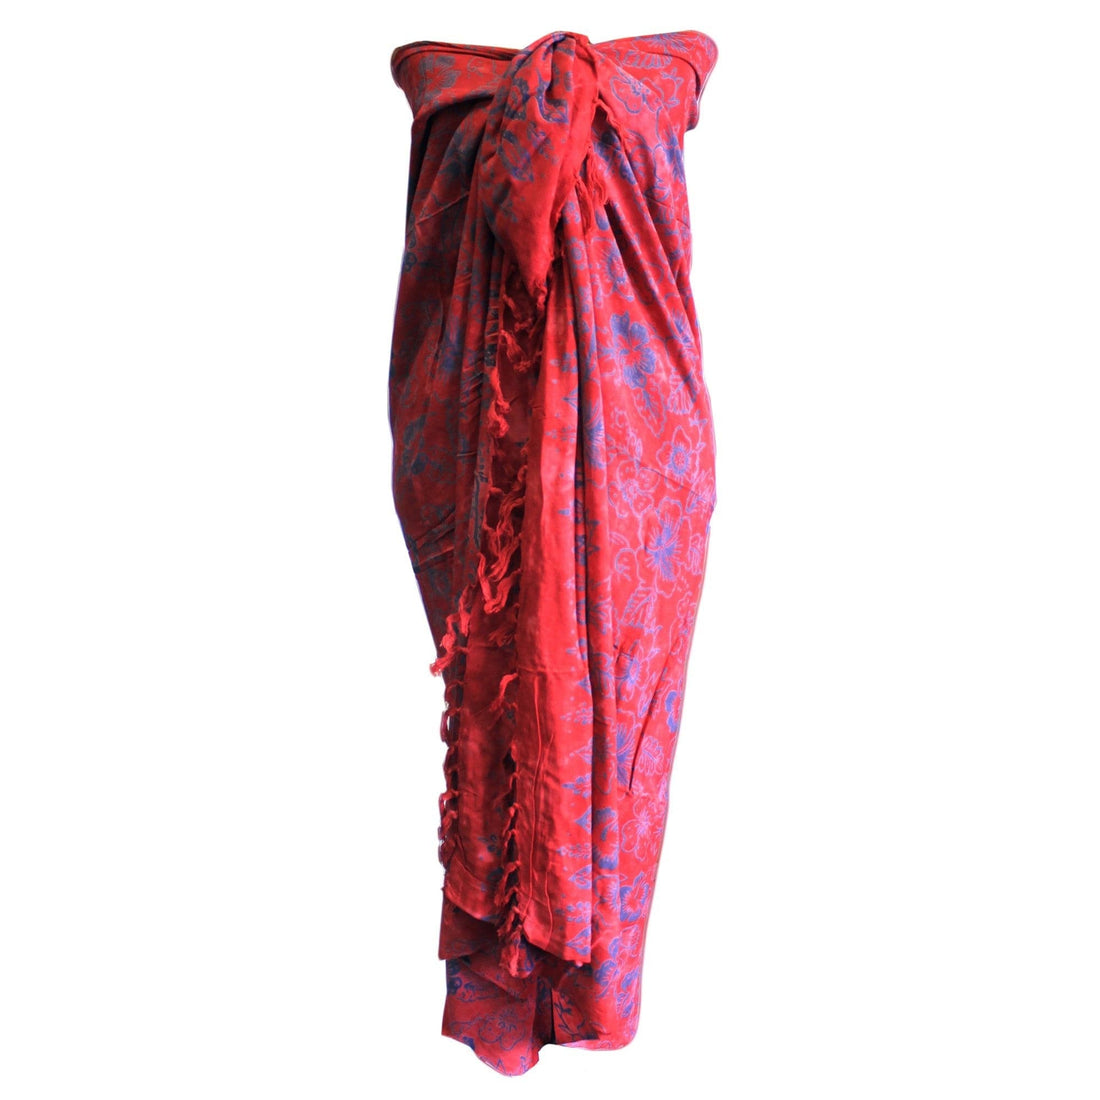 Bali Block Print Sarong - Tropical (4 Assorted Colours) - best price from Maltashopper.com BBP-03DS